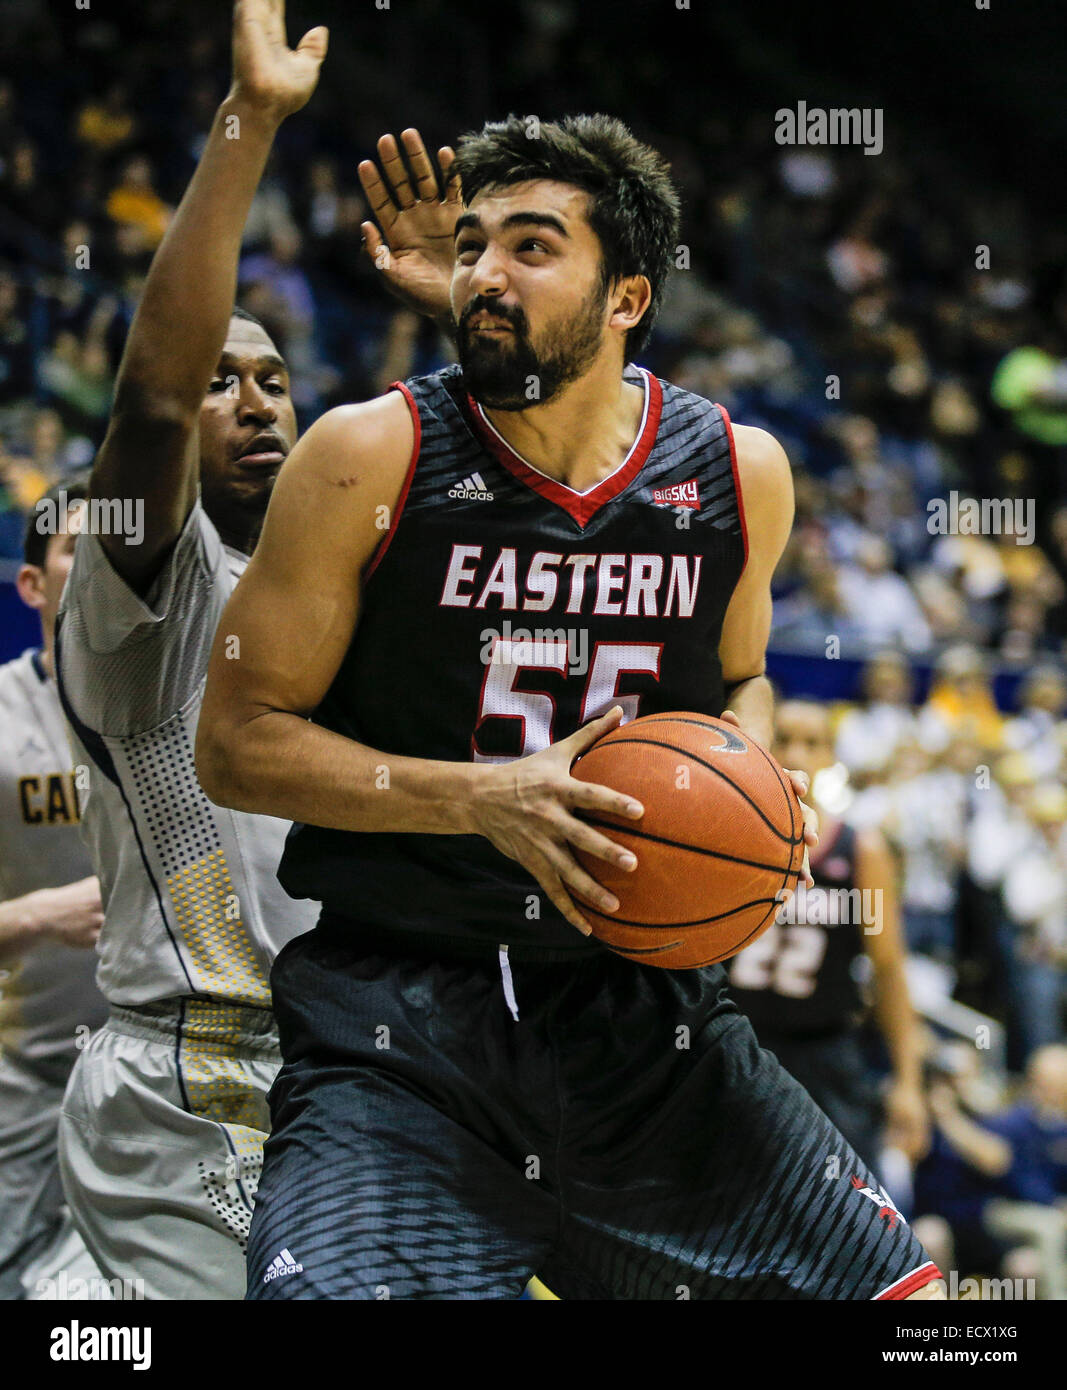 Berkeley, California, USA. 19th Dec, 2014. E. Washington F # 55 Venky Jois drive to the hoop during NCAA Men's Basketball game between Eastern Washington Eagles and California Golden Bears 67- 78 lost at Hass Pavilion Berkeley Calif. Credit:  csm/Alamy Live News Stock Photo